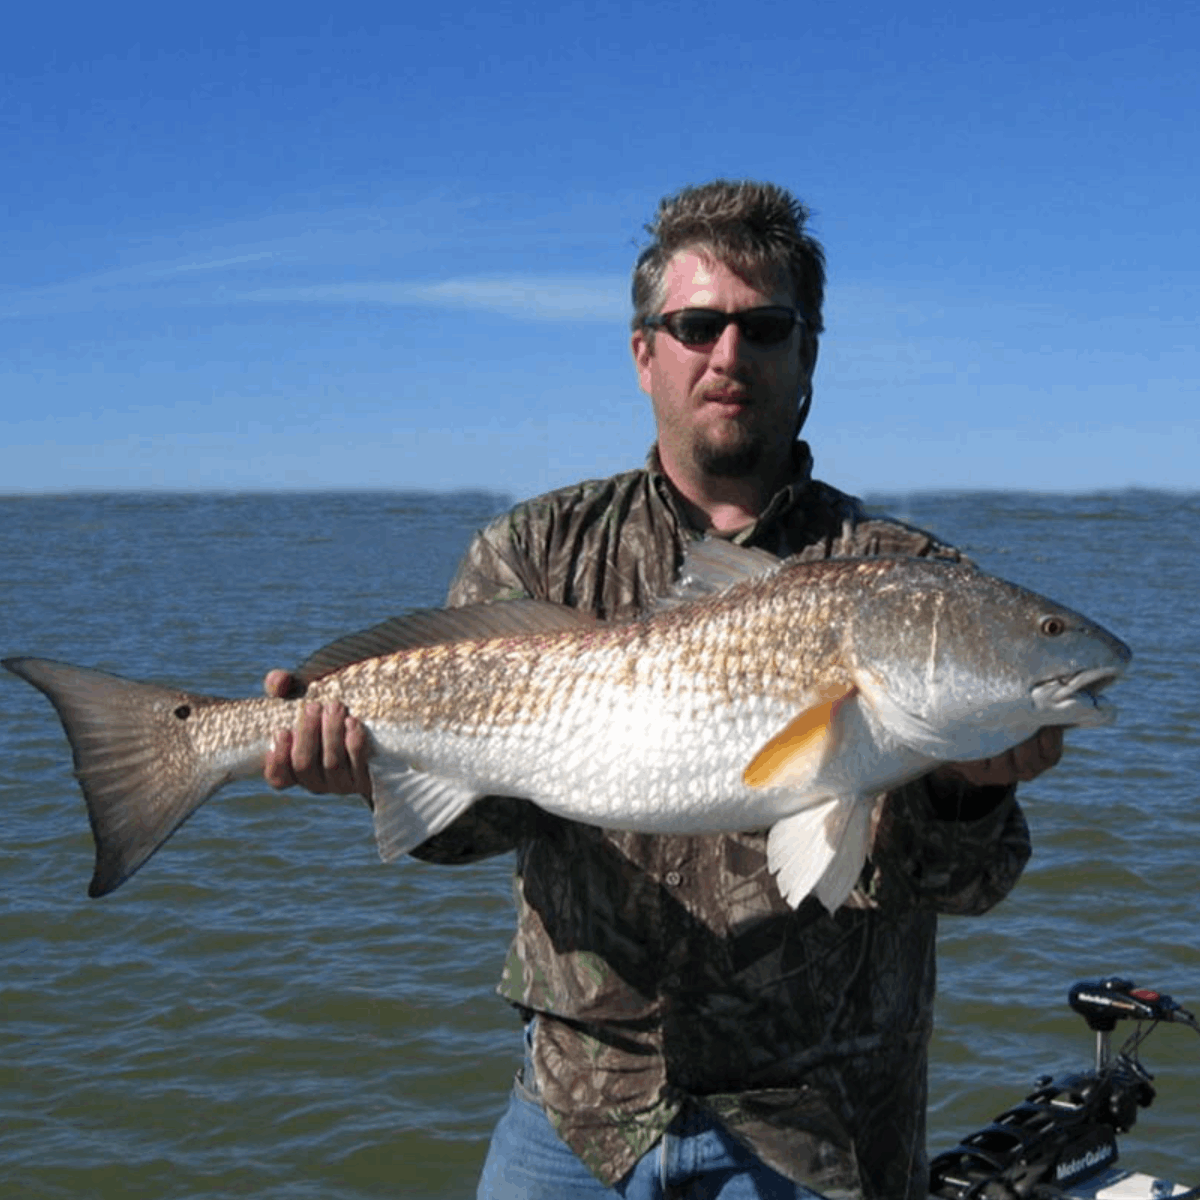 Tampa Bay Fishing spots - Numbers